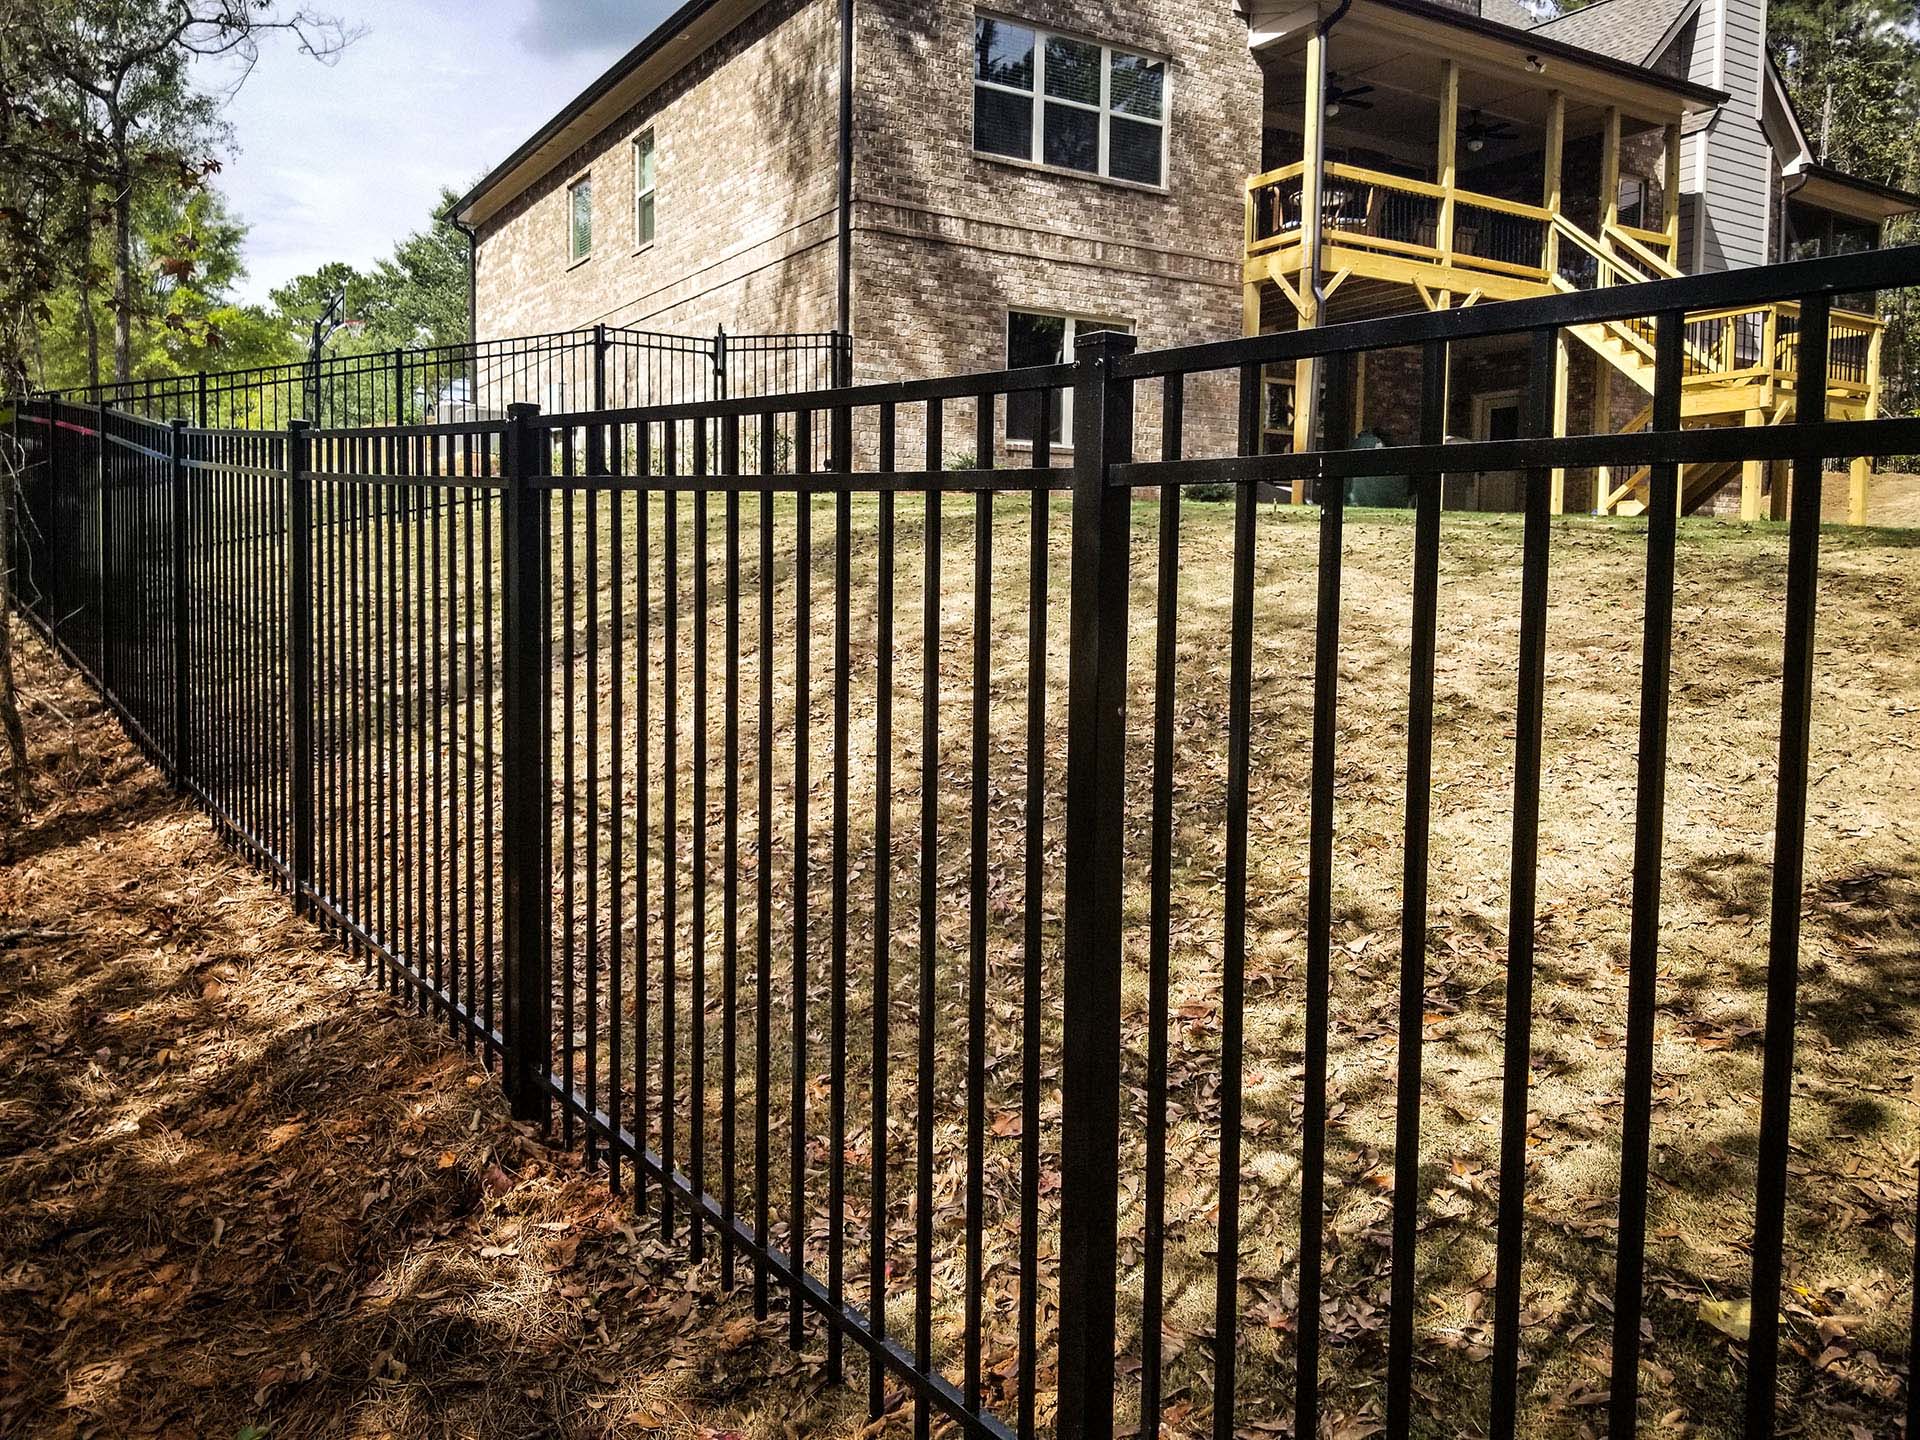 Side-view of black aluminum fencing meeting a brick home to enclose the backyard